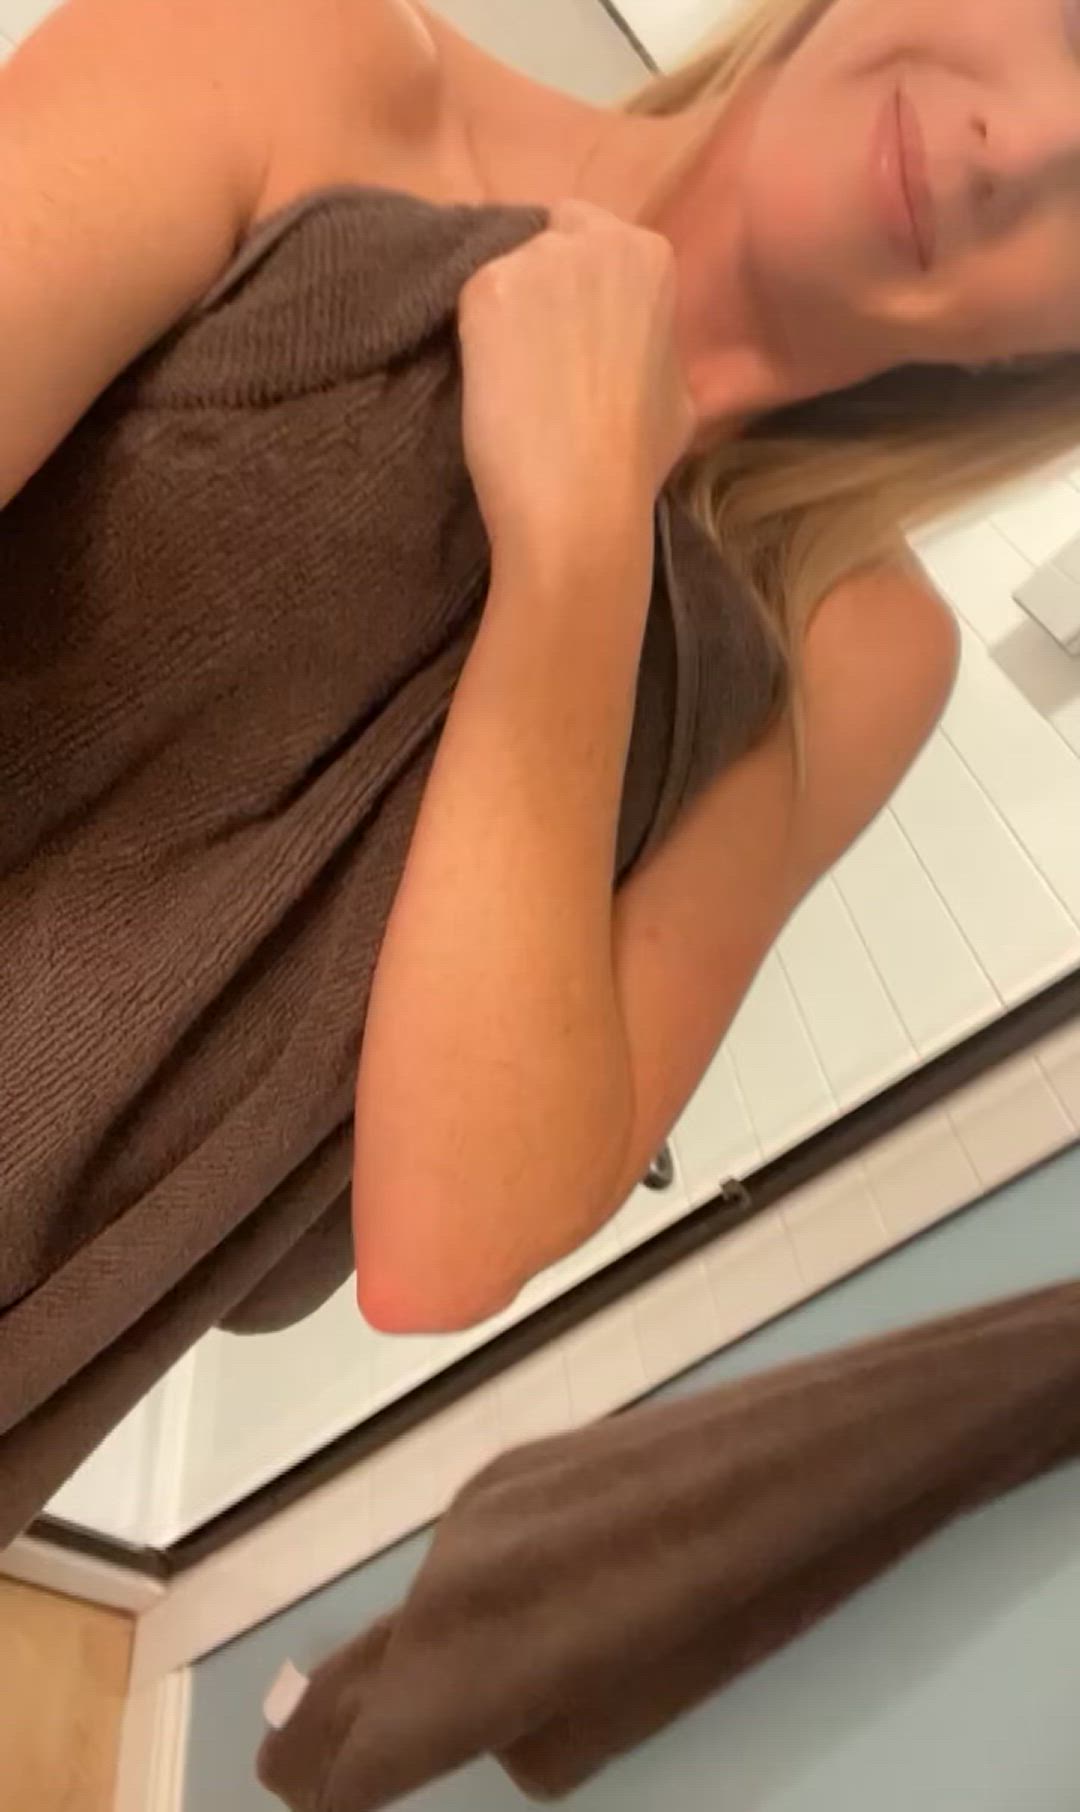 Tits porn video with onlyfans model tallgirlalli <strong>@tallgirlalli</strong>